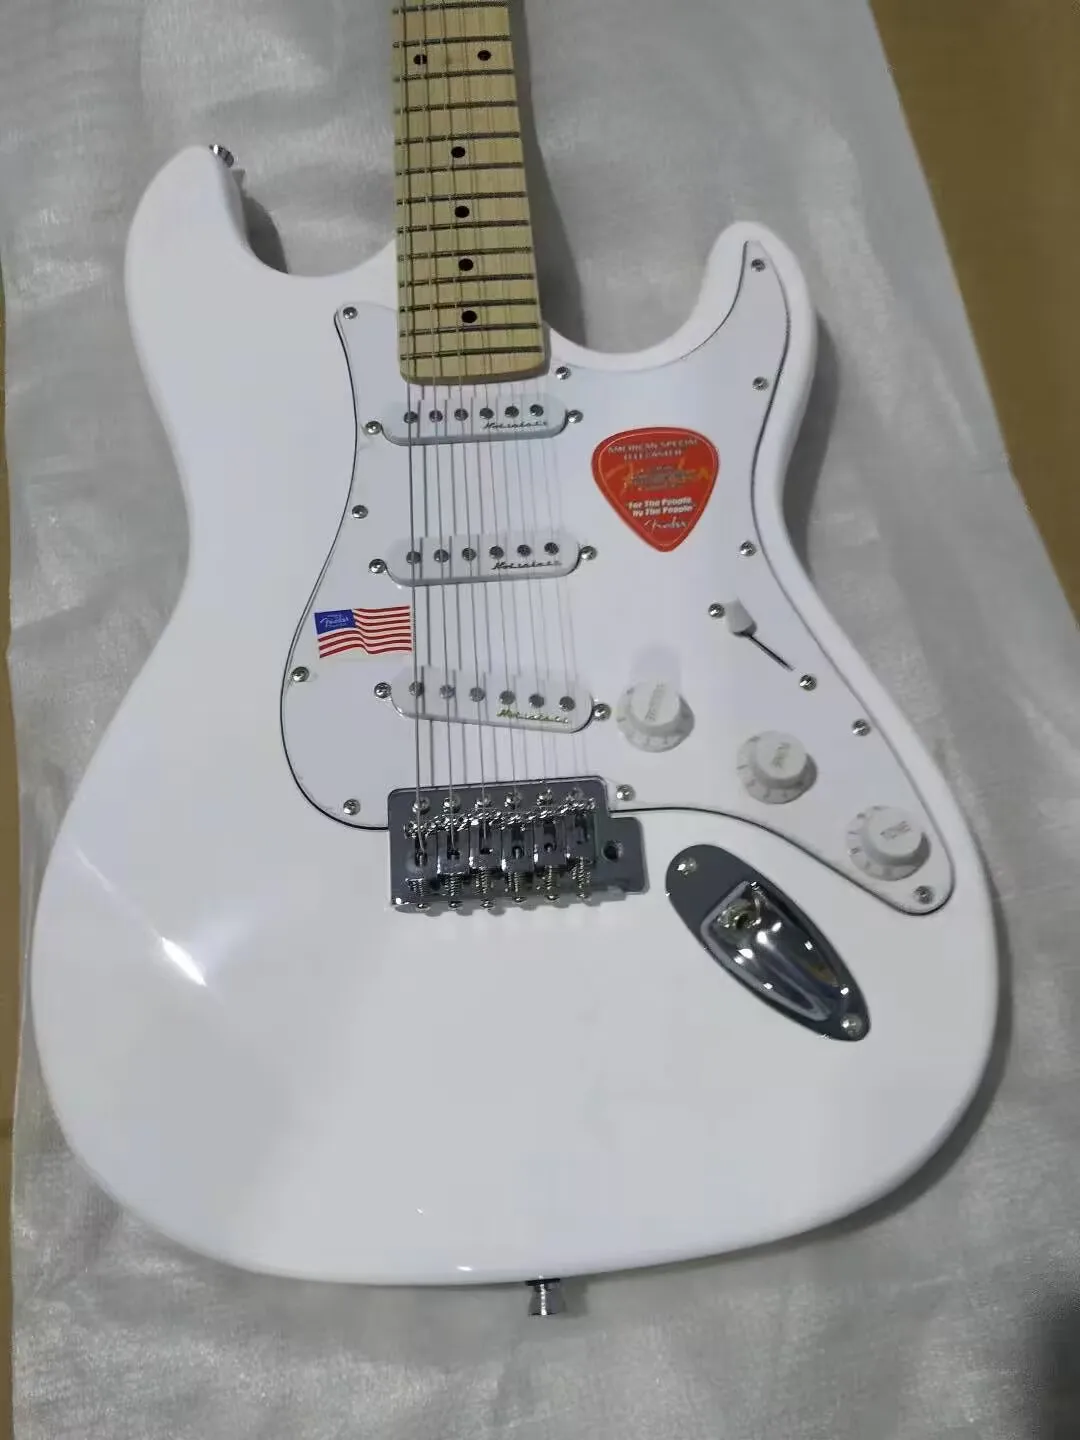 

F ST groove refers to the plate Stratocast-er Signature scalloped fingerboard big headstock White Electric Guitar